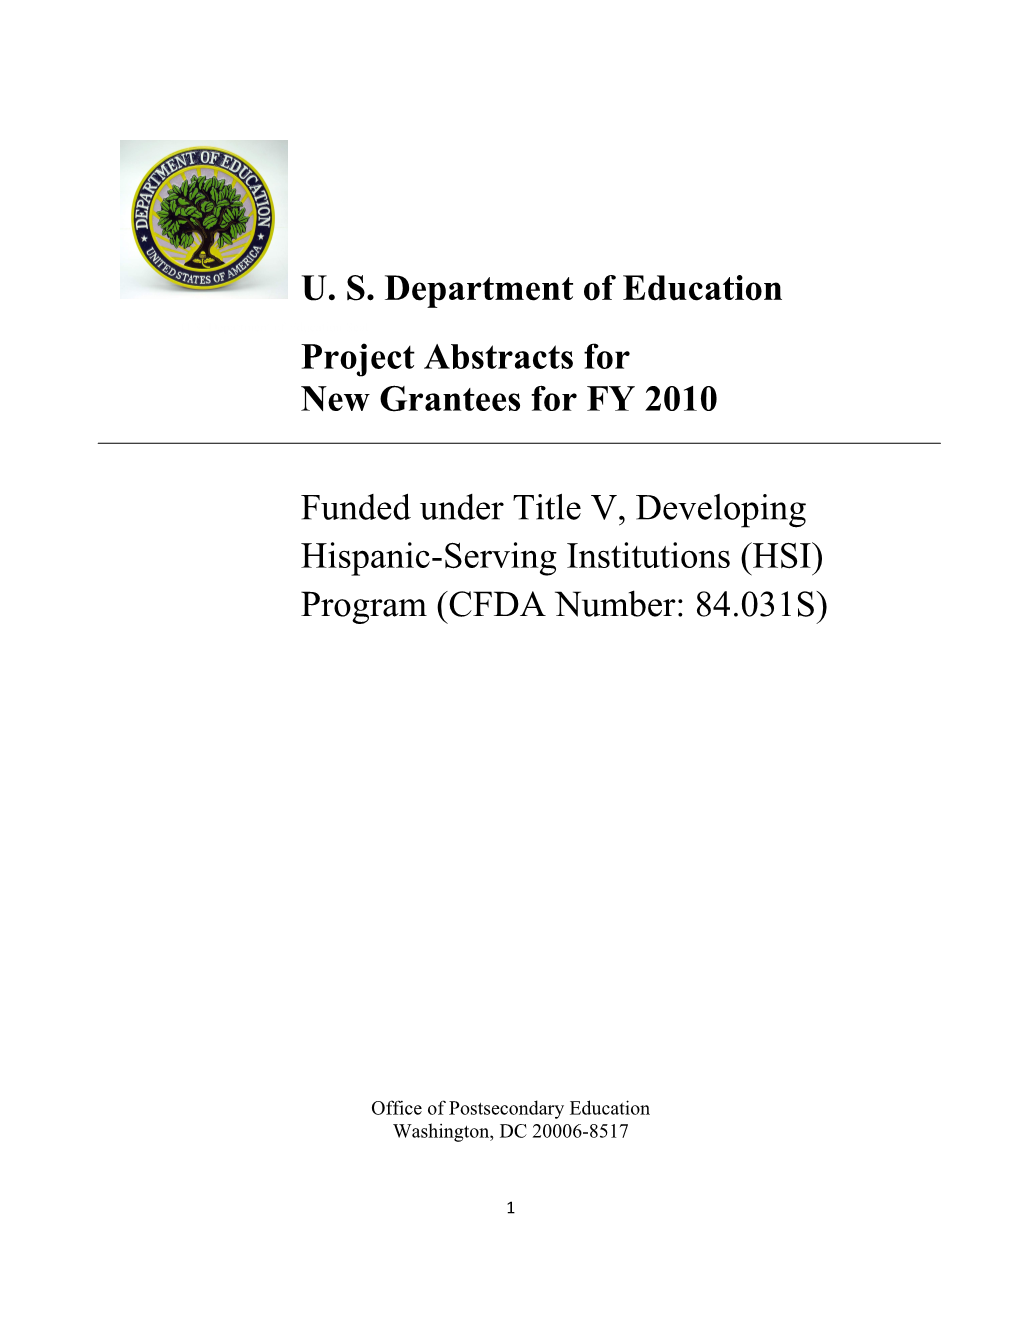 FY 2010 Project Abstracts Under the Title V Developing Hispanic-Serving Institutions Program